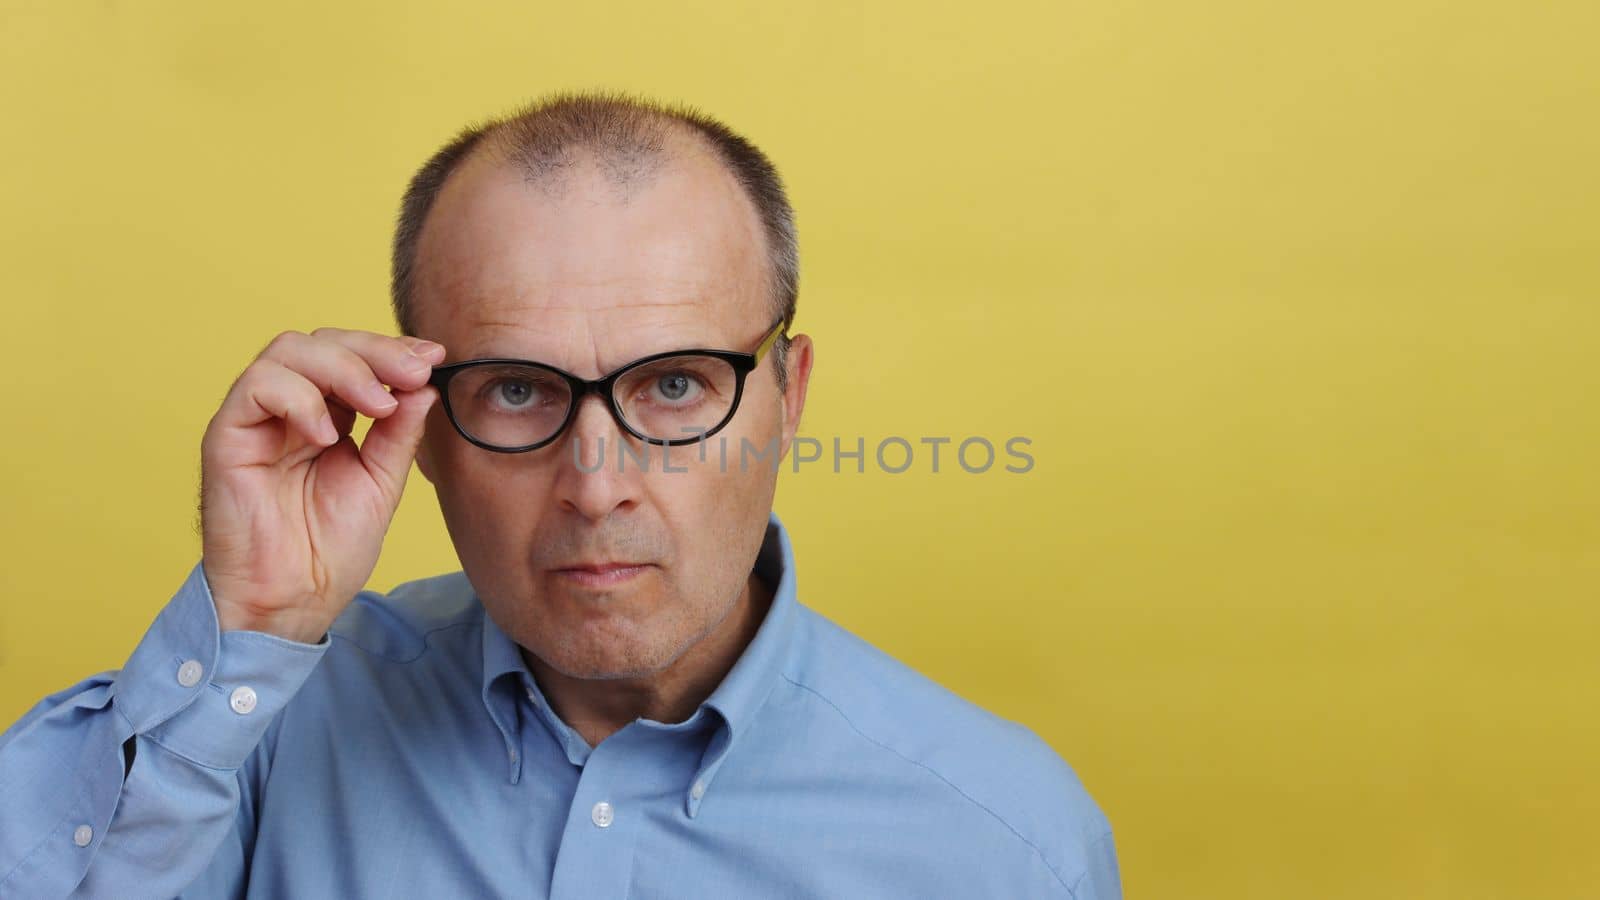 Handsome, intelligent-looking man, 45-55 years old, wearing a blue shirt against a yellow background, holding his glasses with his hand.